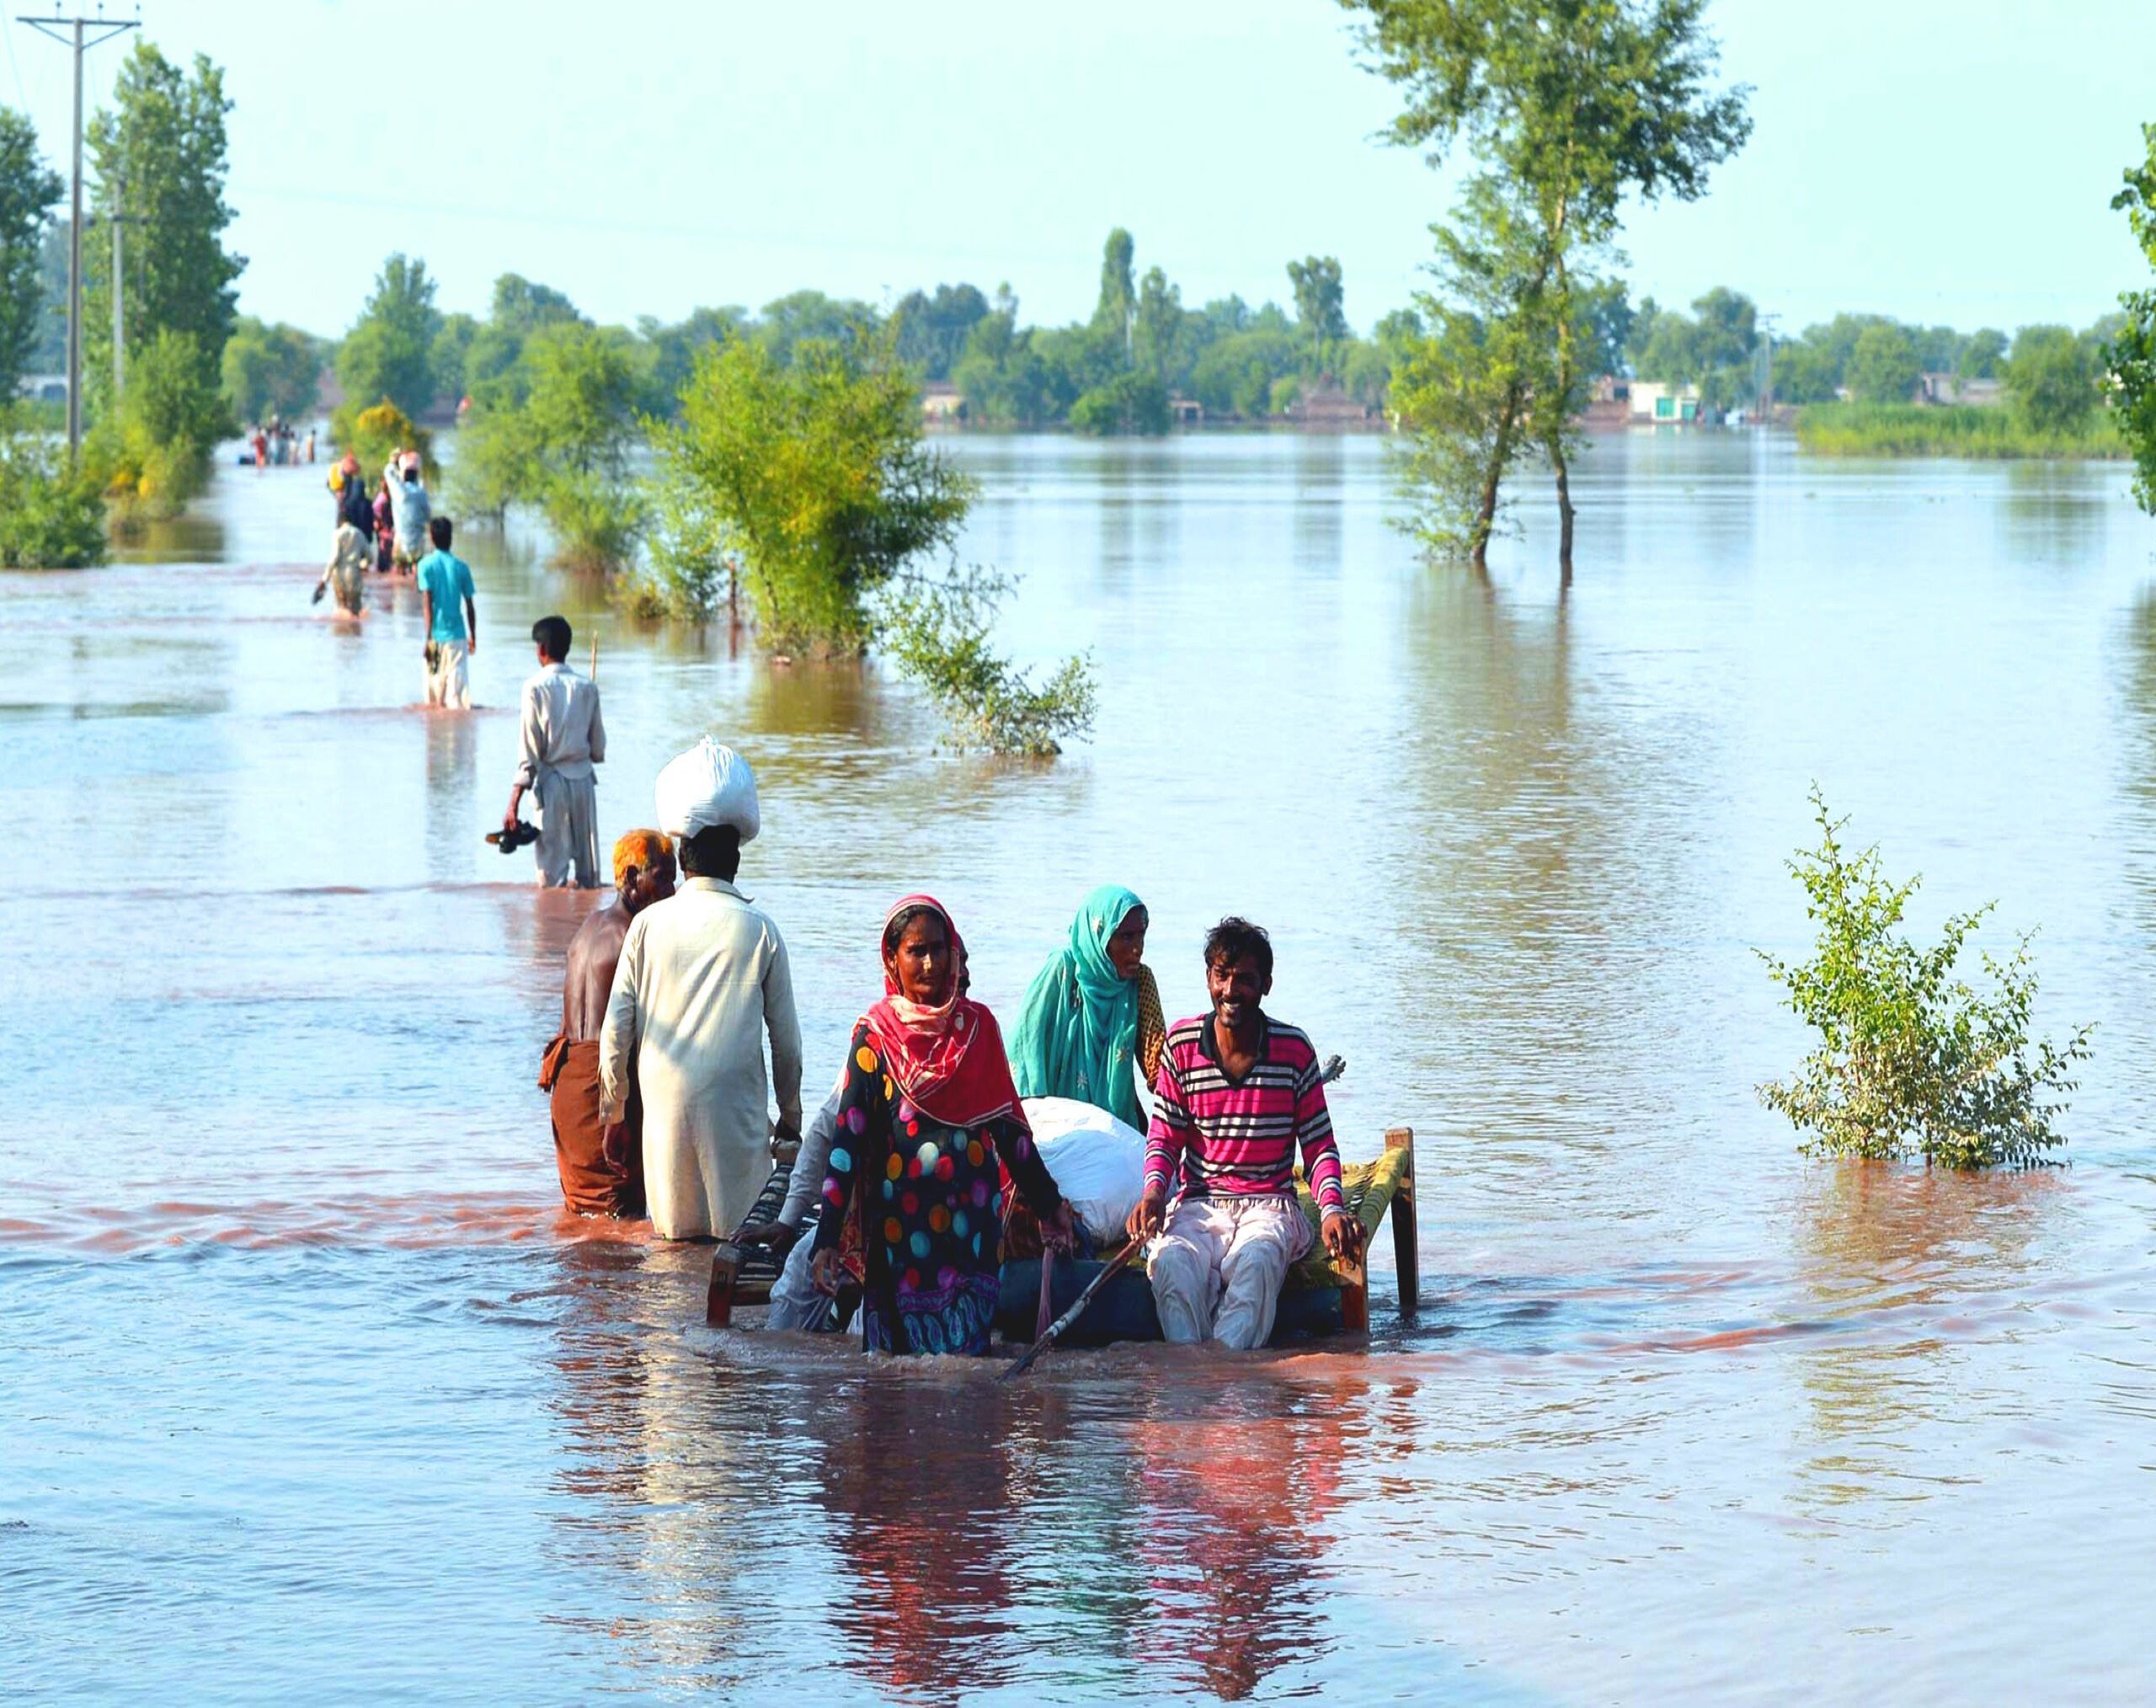 Appeal for the Relief of Flood Victims